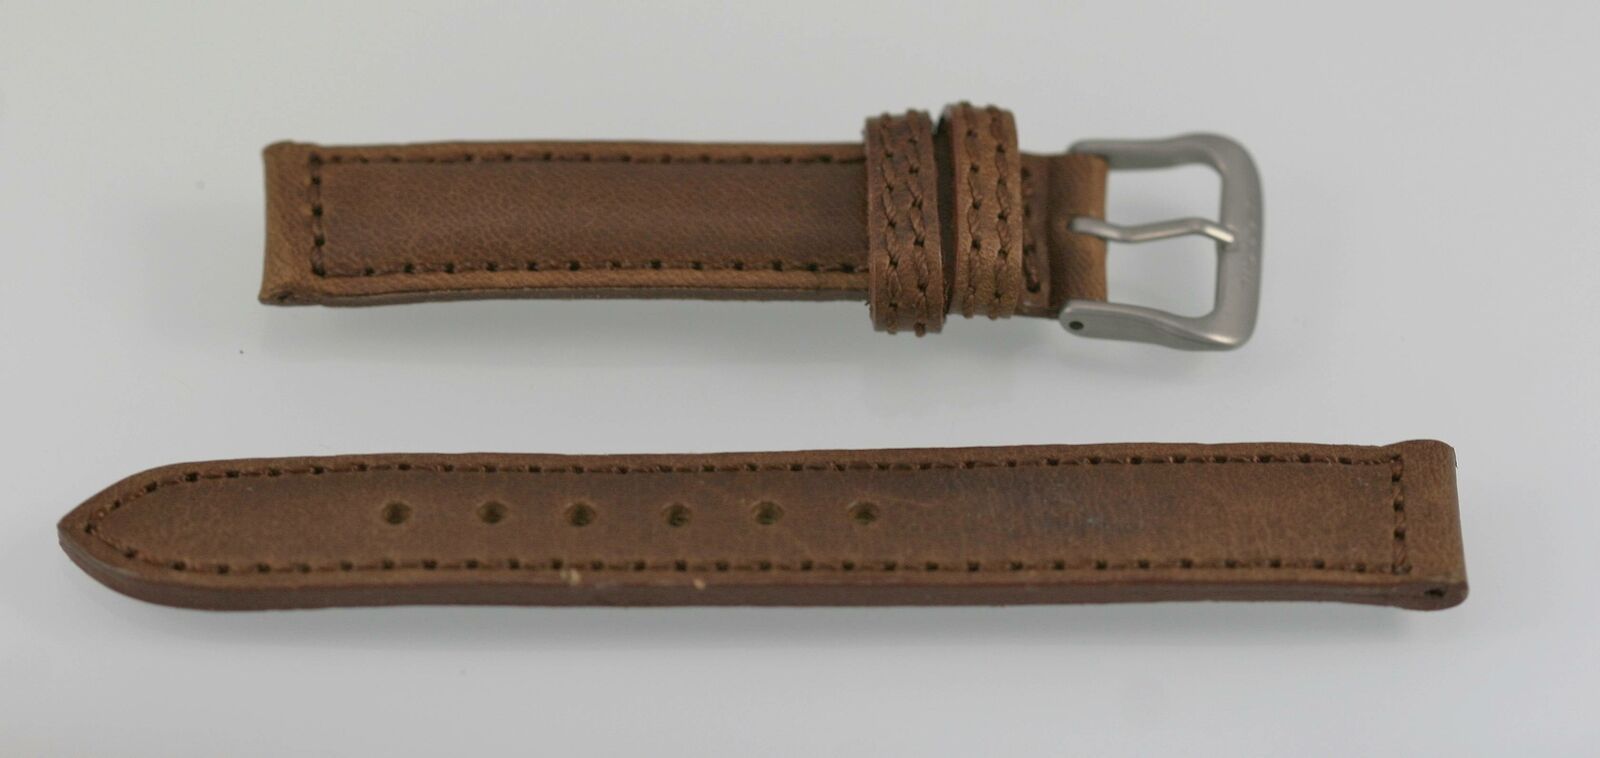 Fossil Unisex Stainless Steel Brown Leather Replacement Watch Band 14mm ...